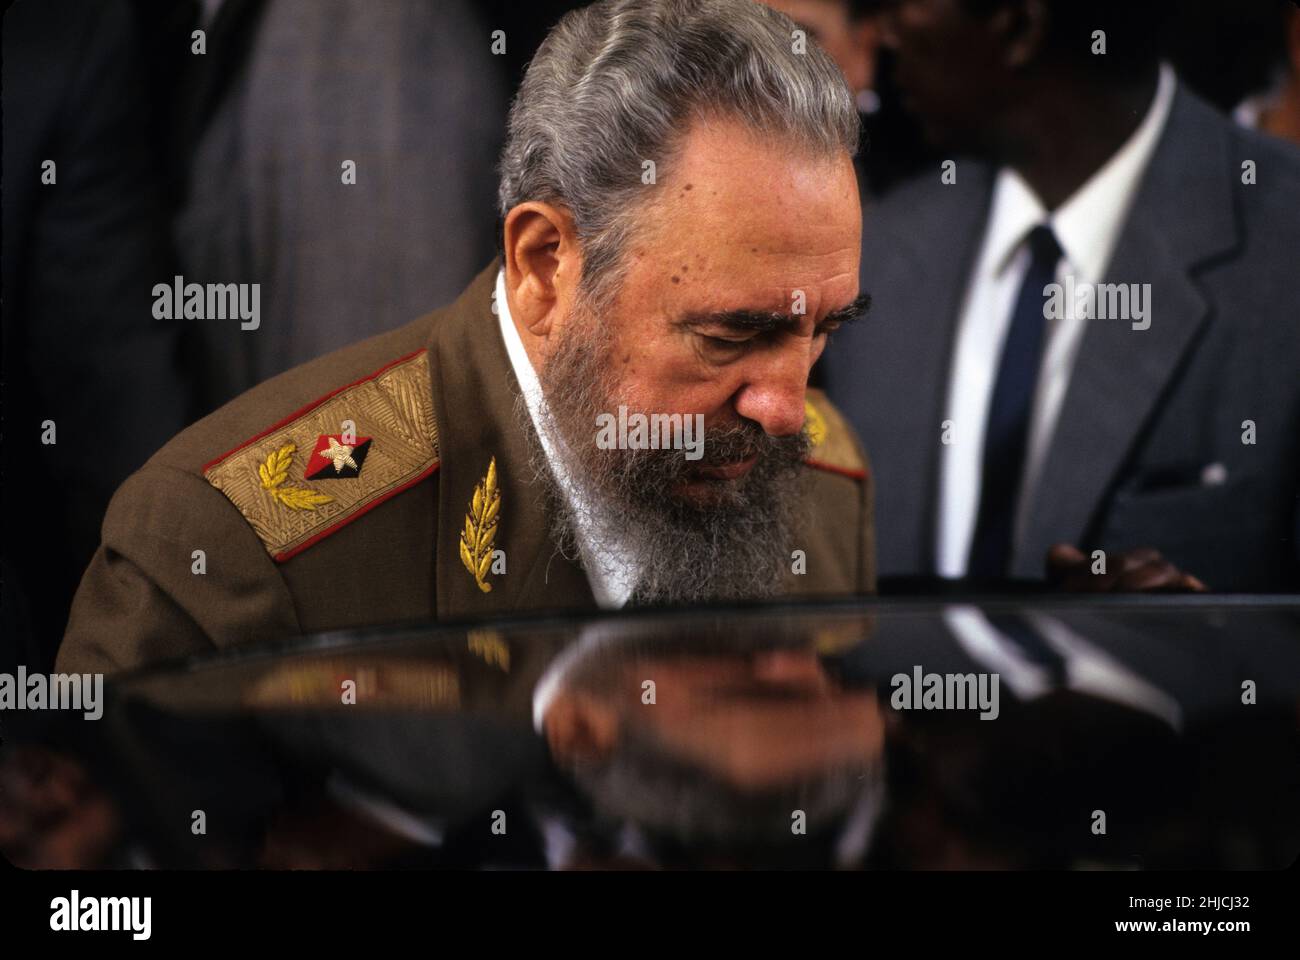 Cuban president Fidel Castro exits the National Auditorium in Mexico City where he attended the inauguration of the newly elected president Ernesto Zedillo. Mexico City, Mexico, December 1, 1994. Stock Photo